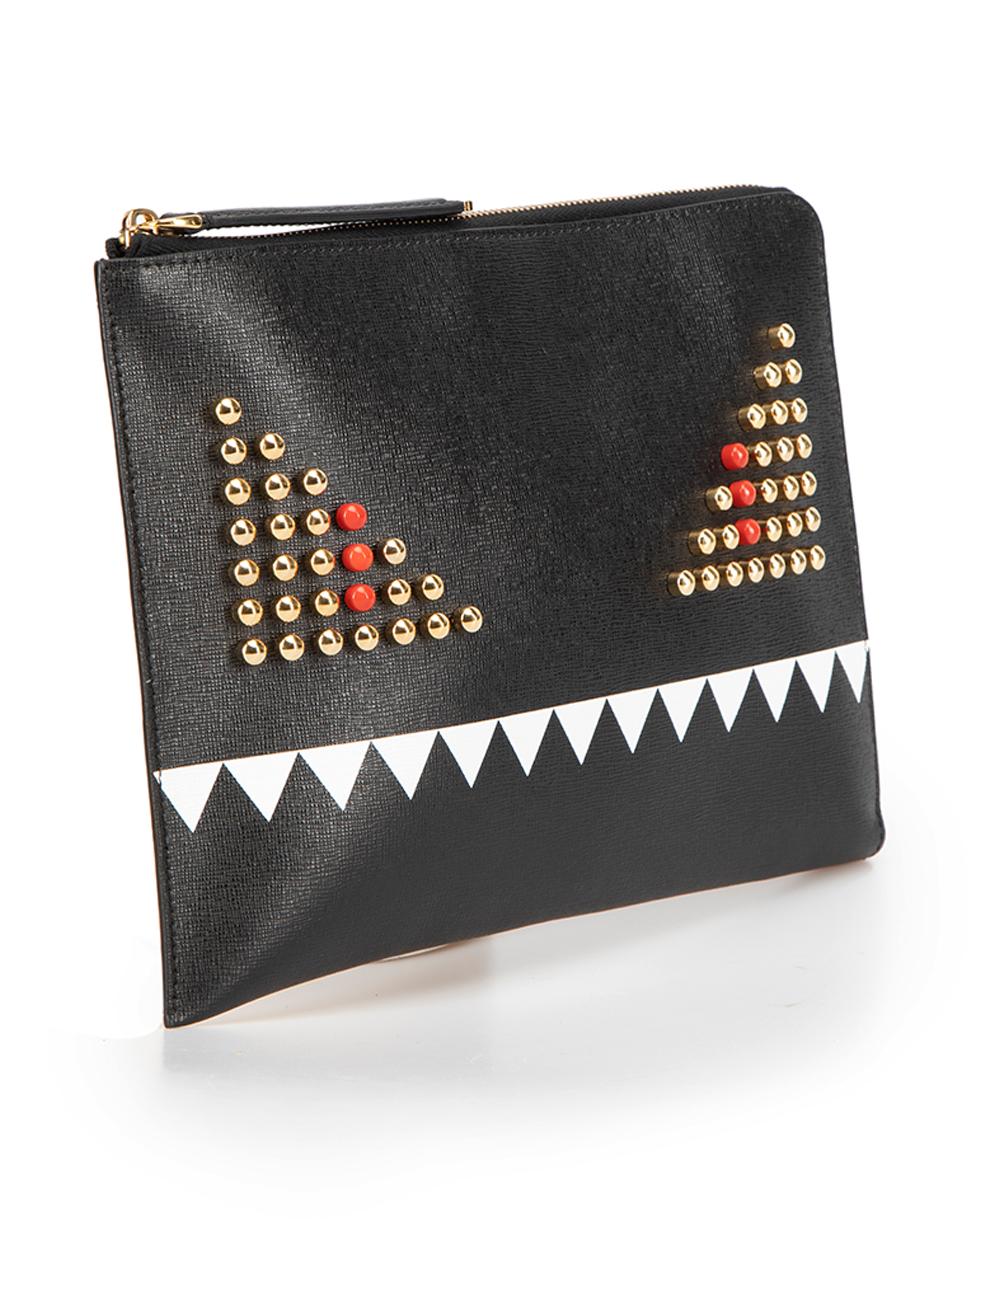 CONDITION is Very good. Minimal wear to clutch is evident. Minimal wear to the front with tiny scratch to the leather on this used Fendi designer resale item. This item comes with original dust bag and box.



Details


Black

Leather

Mini clutch